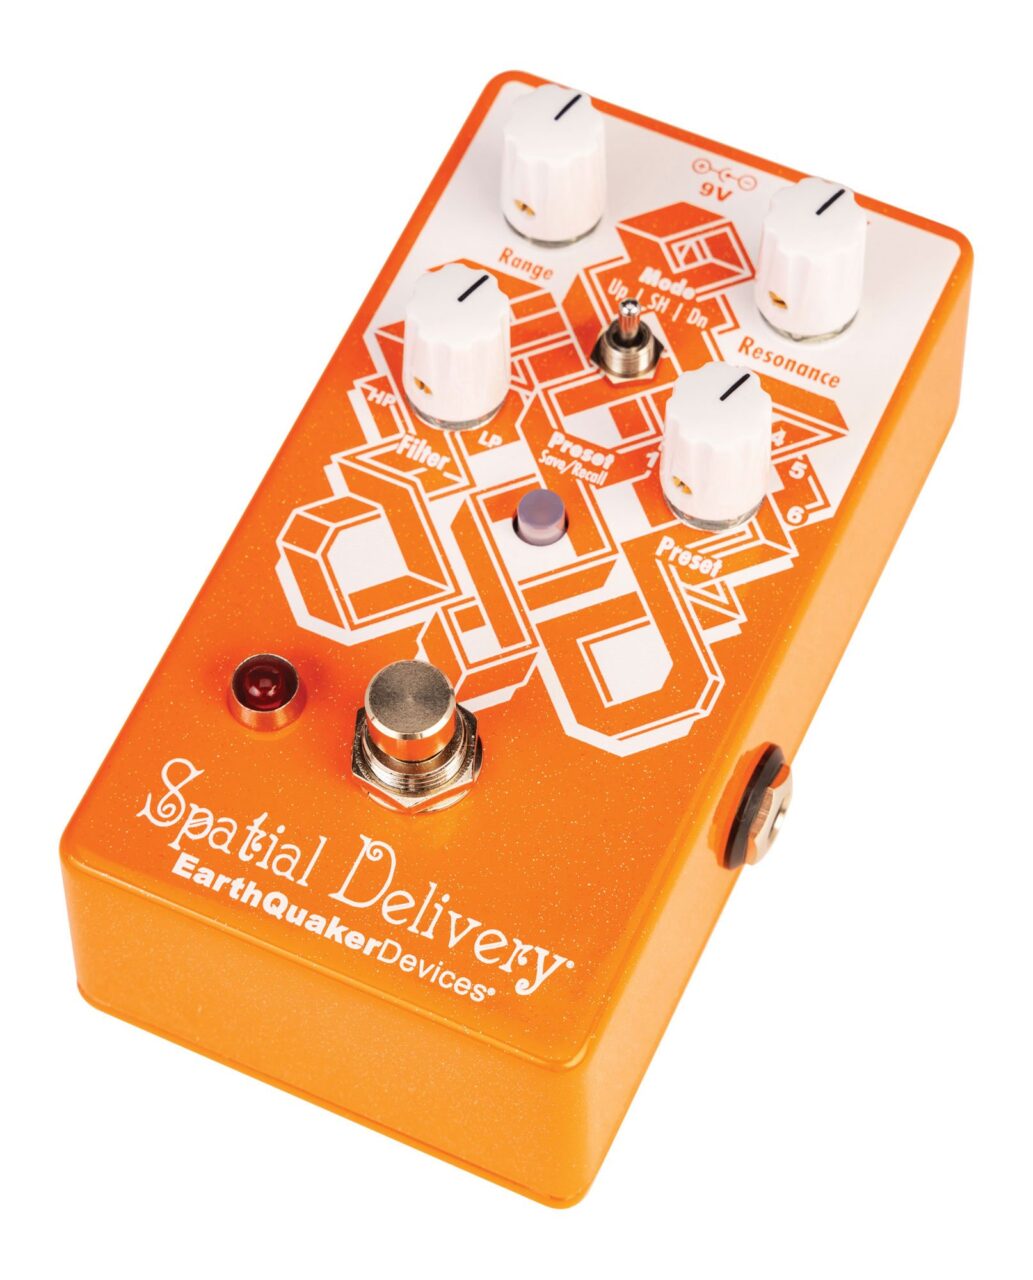 EarthQuaker Devices アースクエイカーデバイセス EQD Spatial Delivery エンペロープフィルター